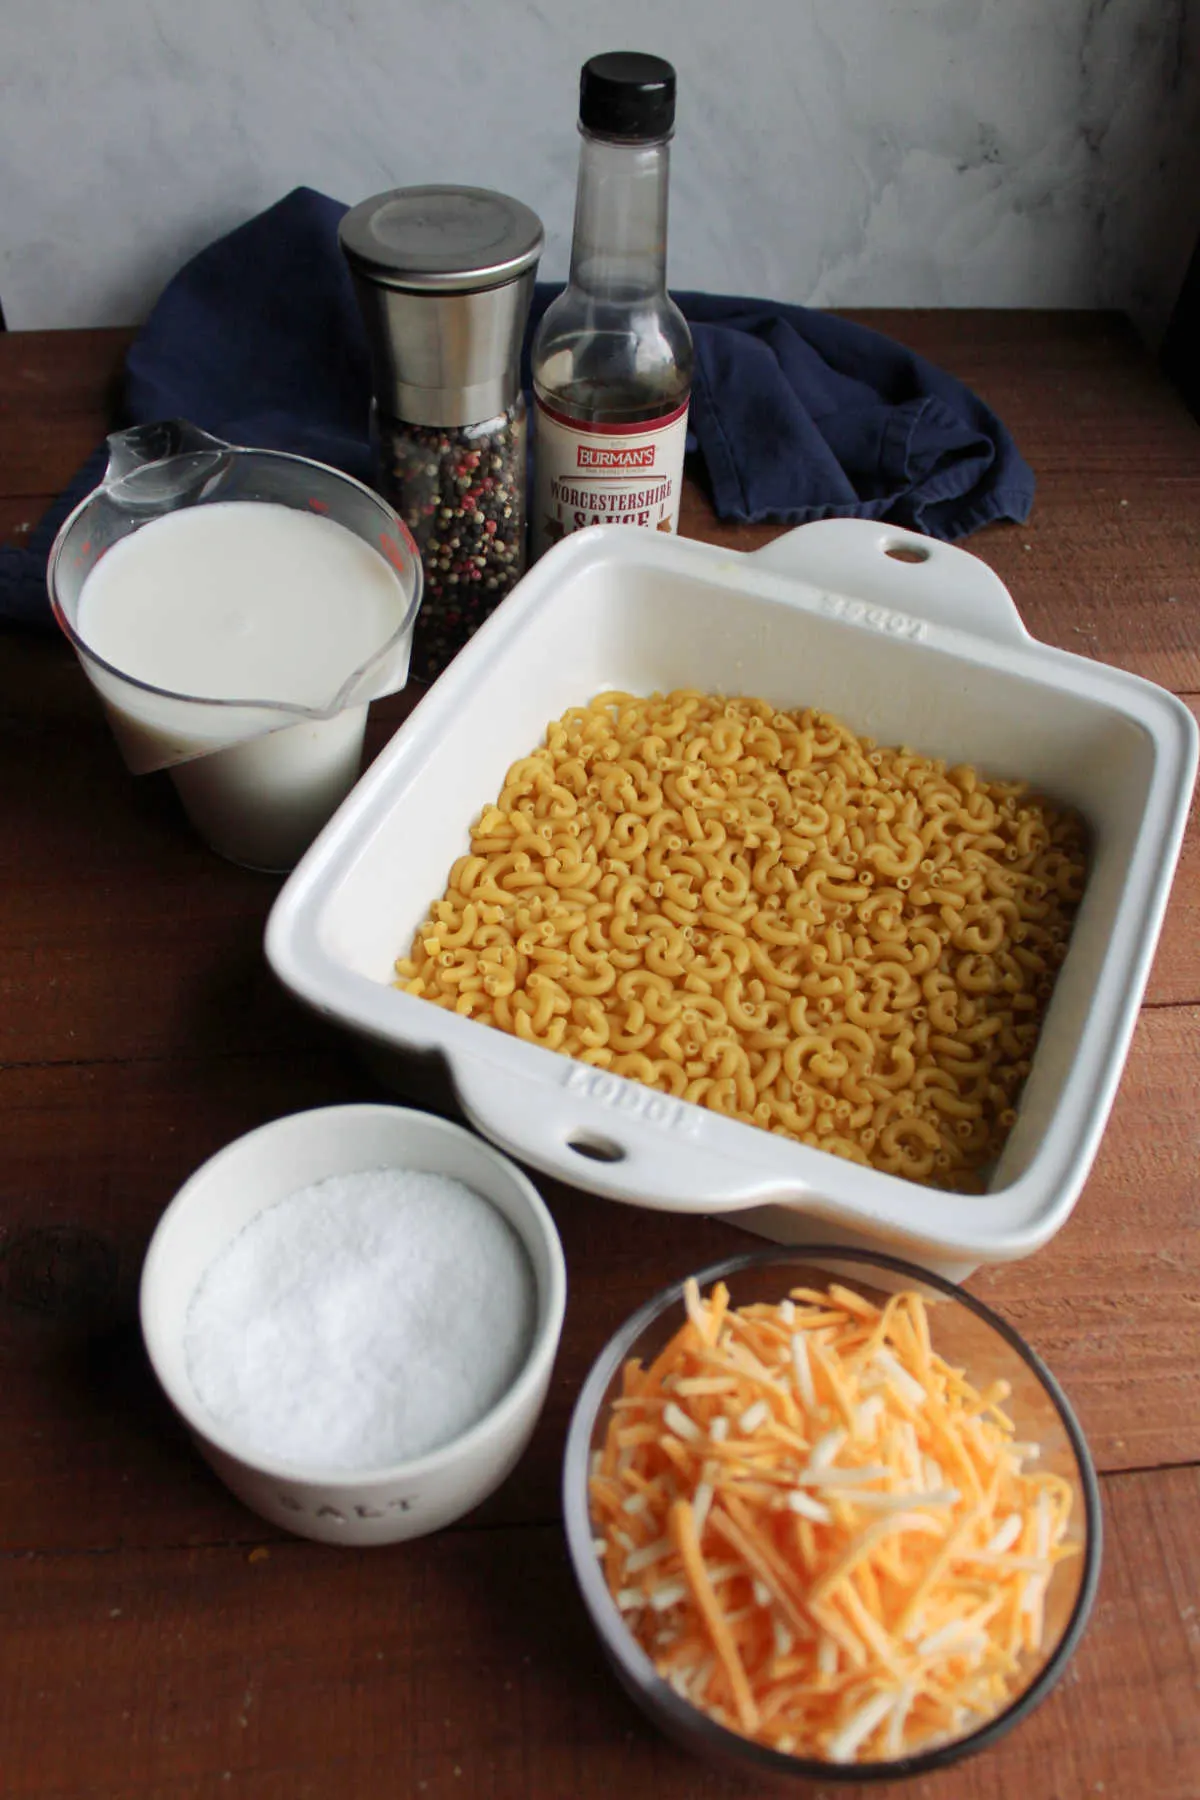 Ingredients including pasta, cheese, milk, salt, pepper, and worcestershire sauce ready to be baked into macaroni and cheese.